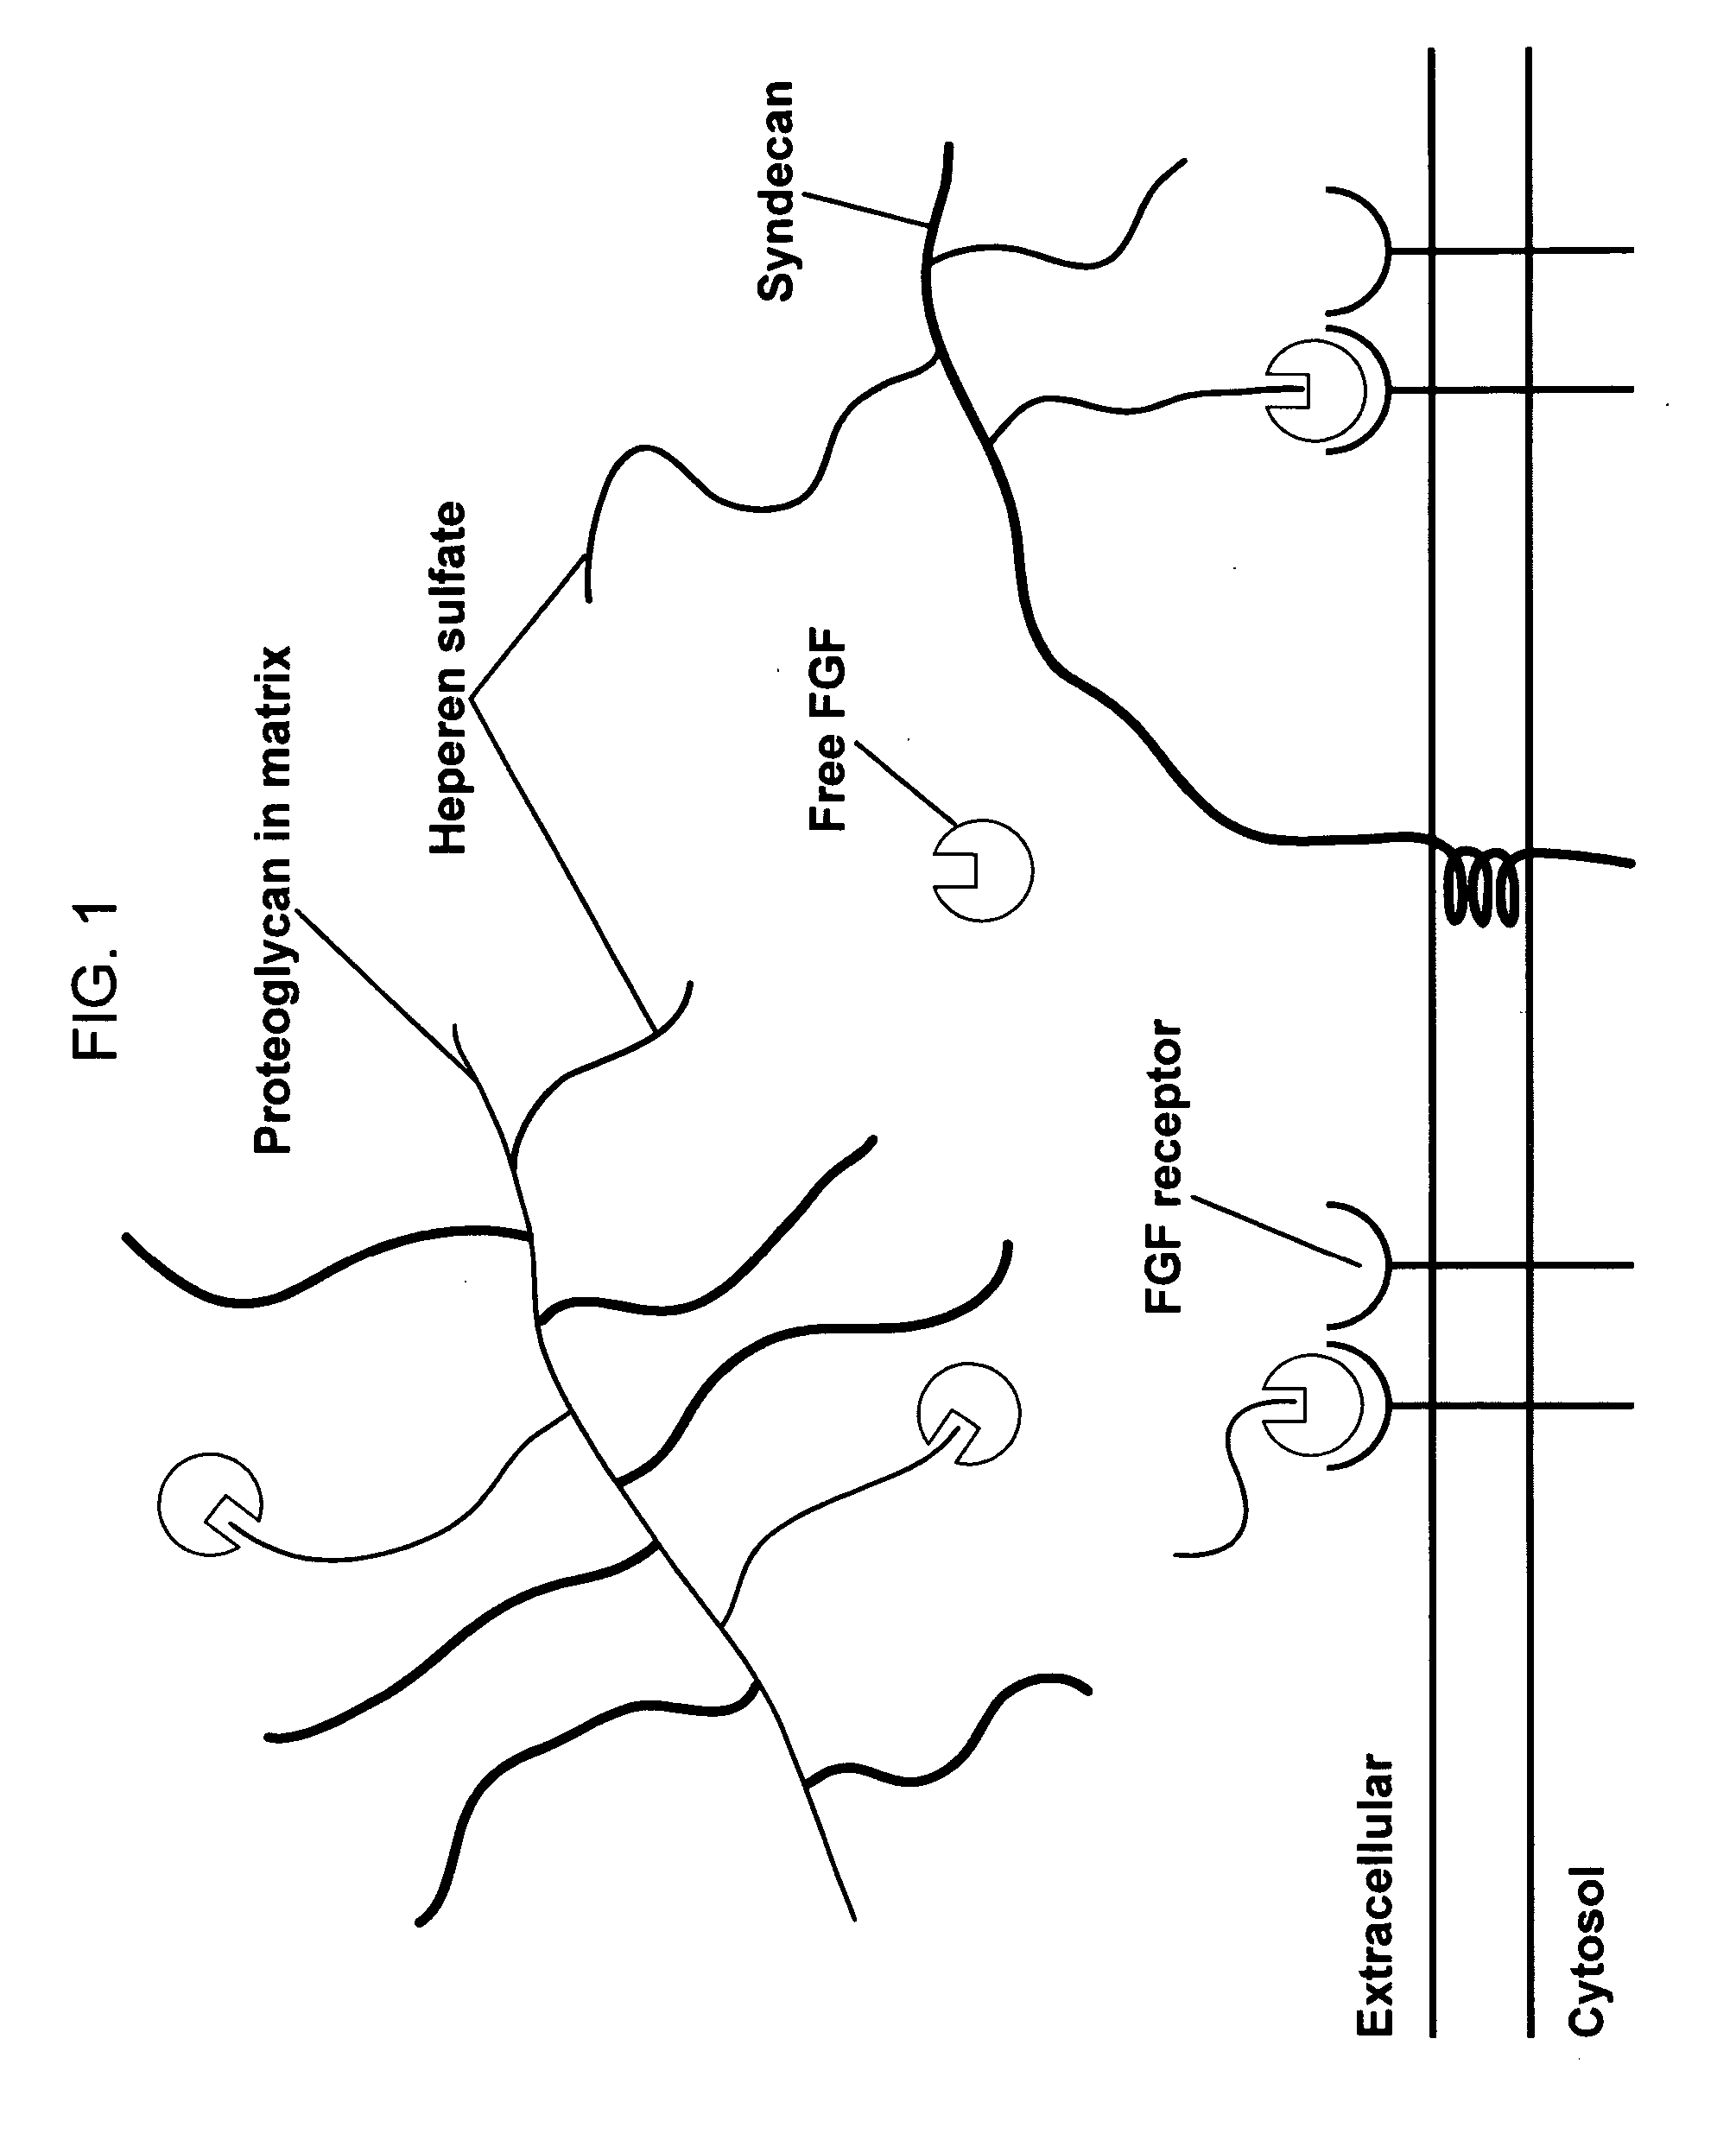 Compositions for regenerating defective or absent myocardium